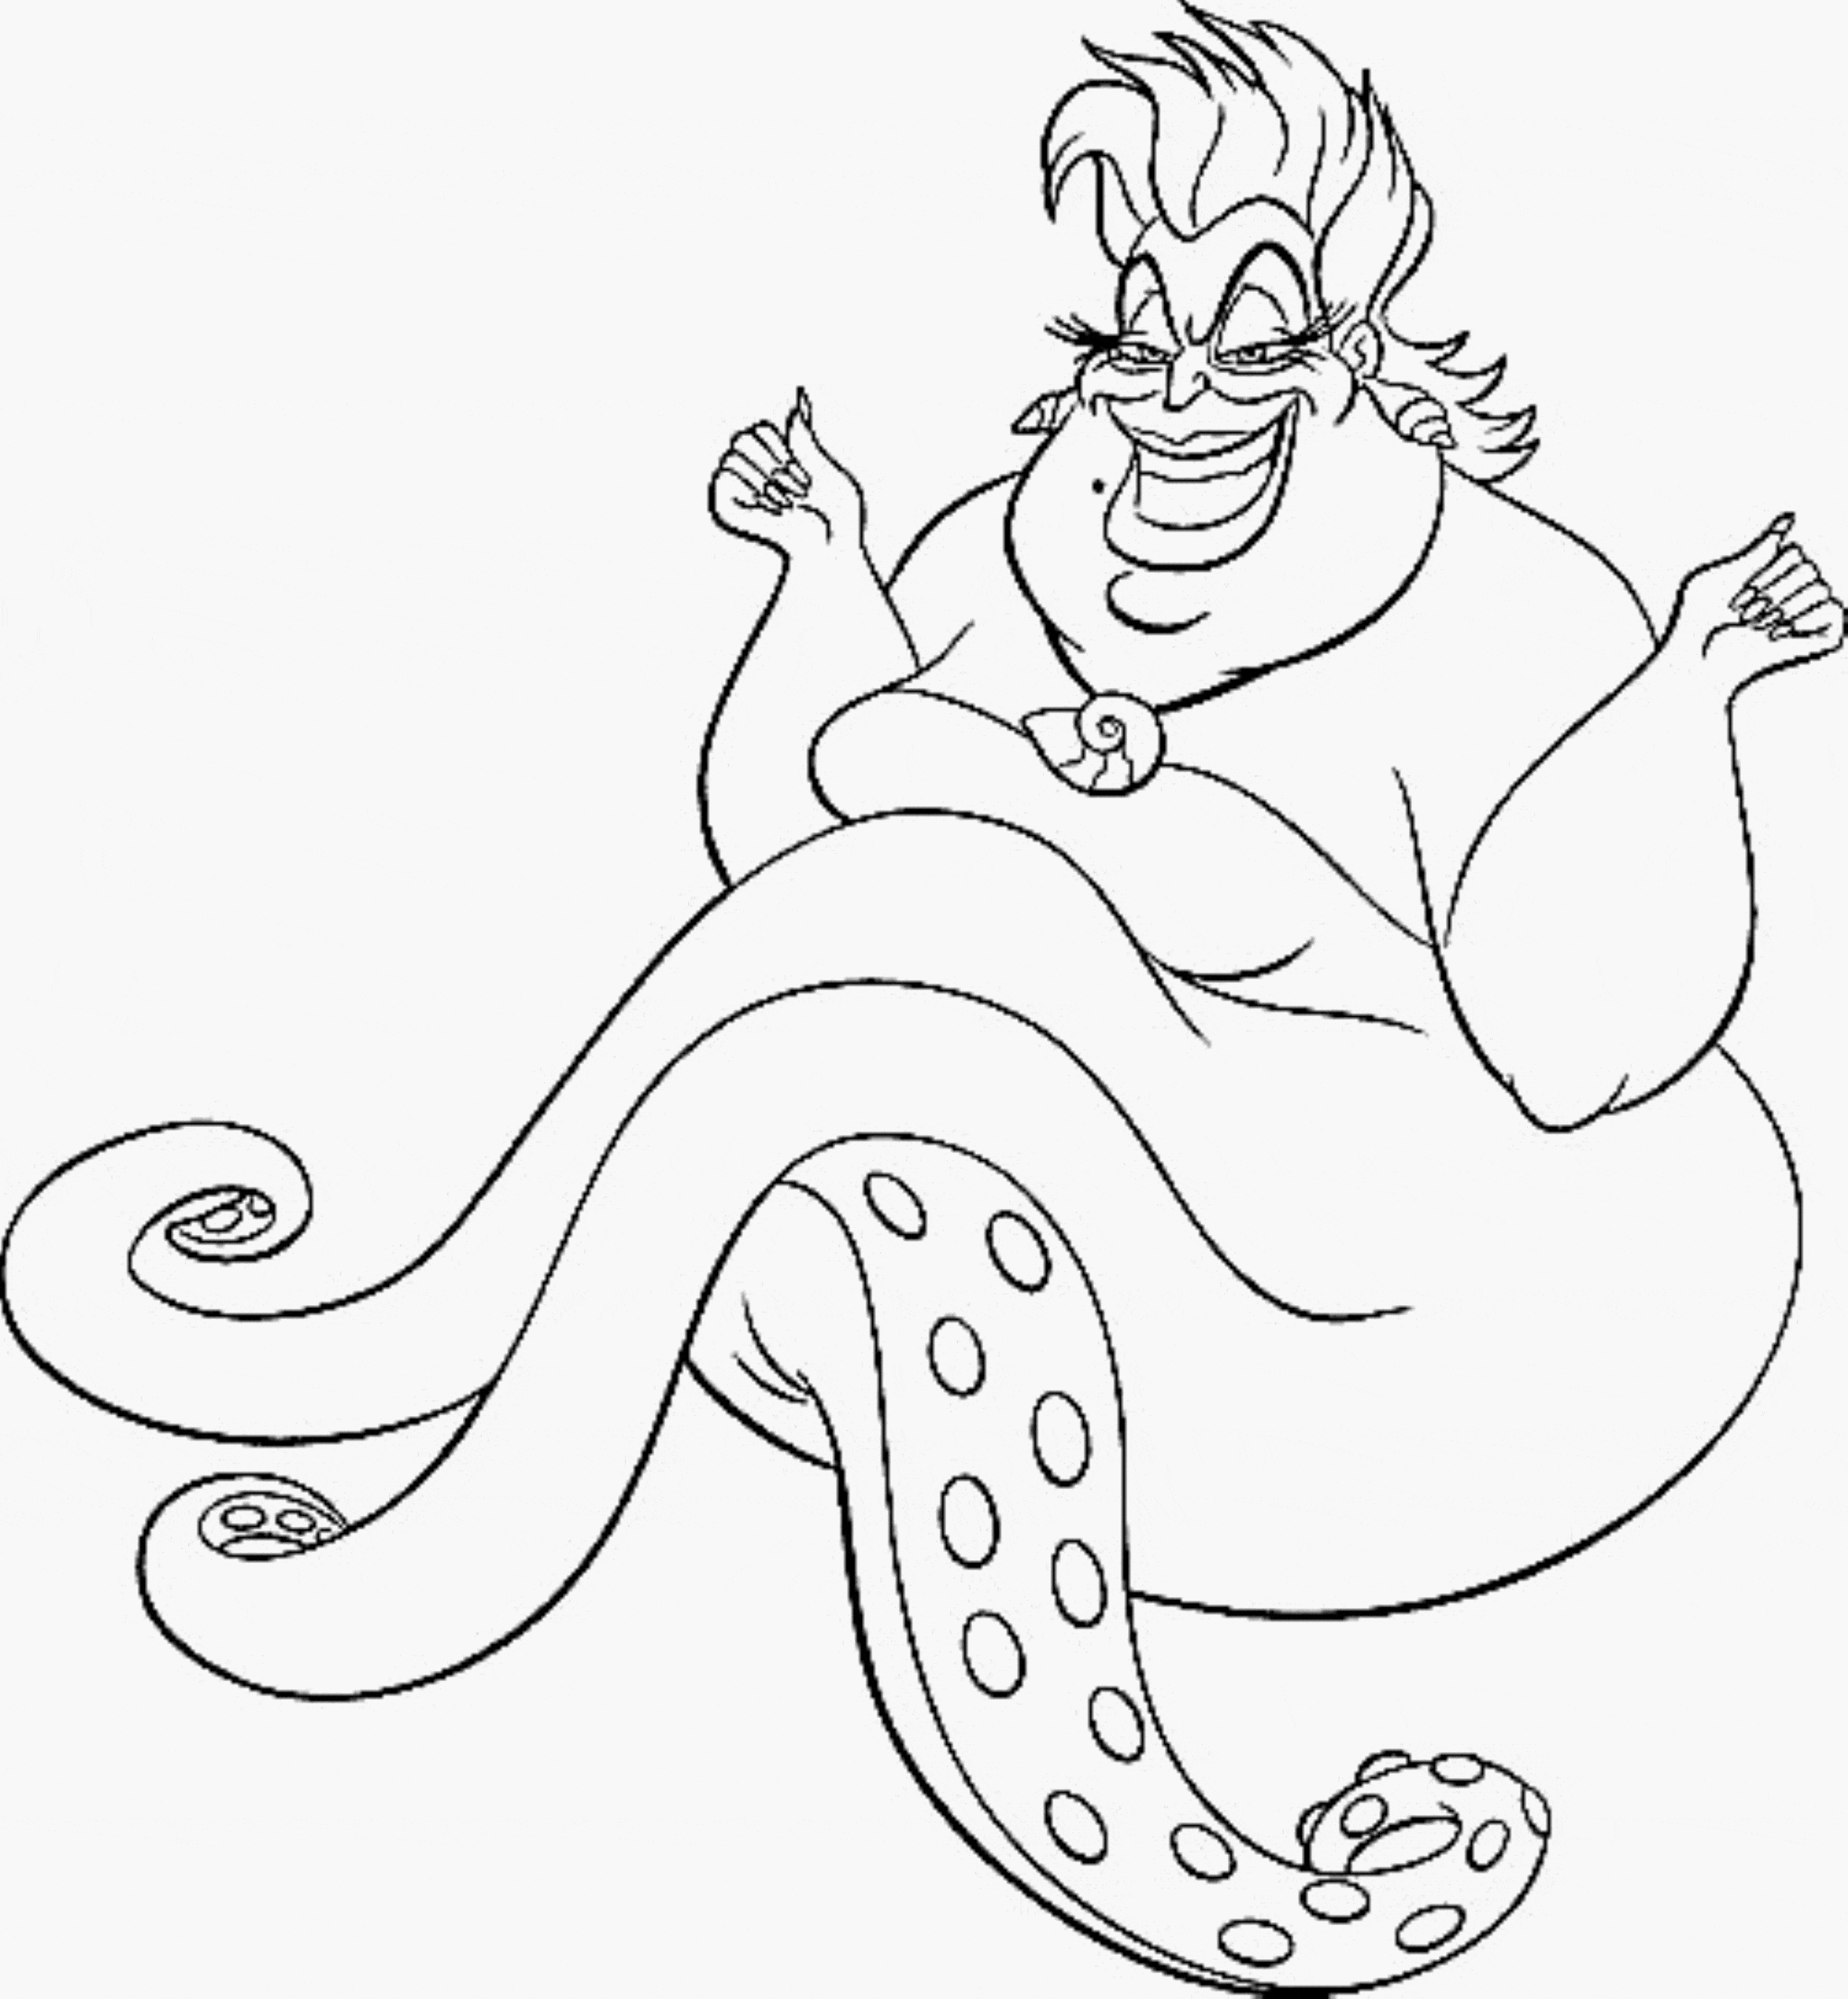 Print & Download Find the Suitable Little Mermaid Coloring Pages for